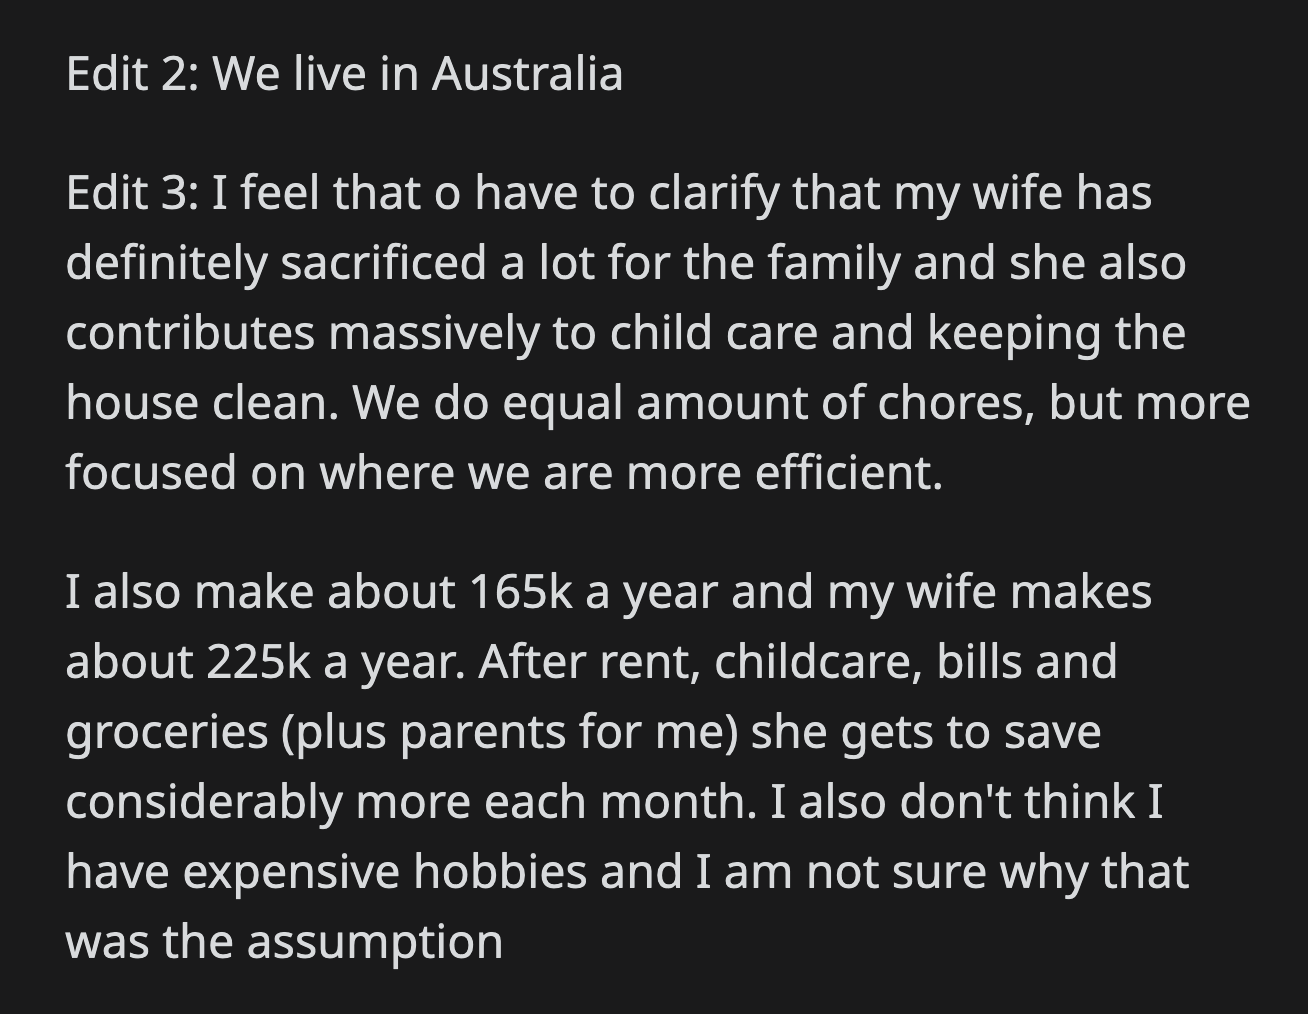 Their finances have always been separated. He thought about having a joint account when their eldest was born, but his wife declined because she had more money saved than OP.